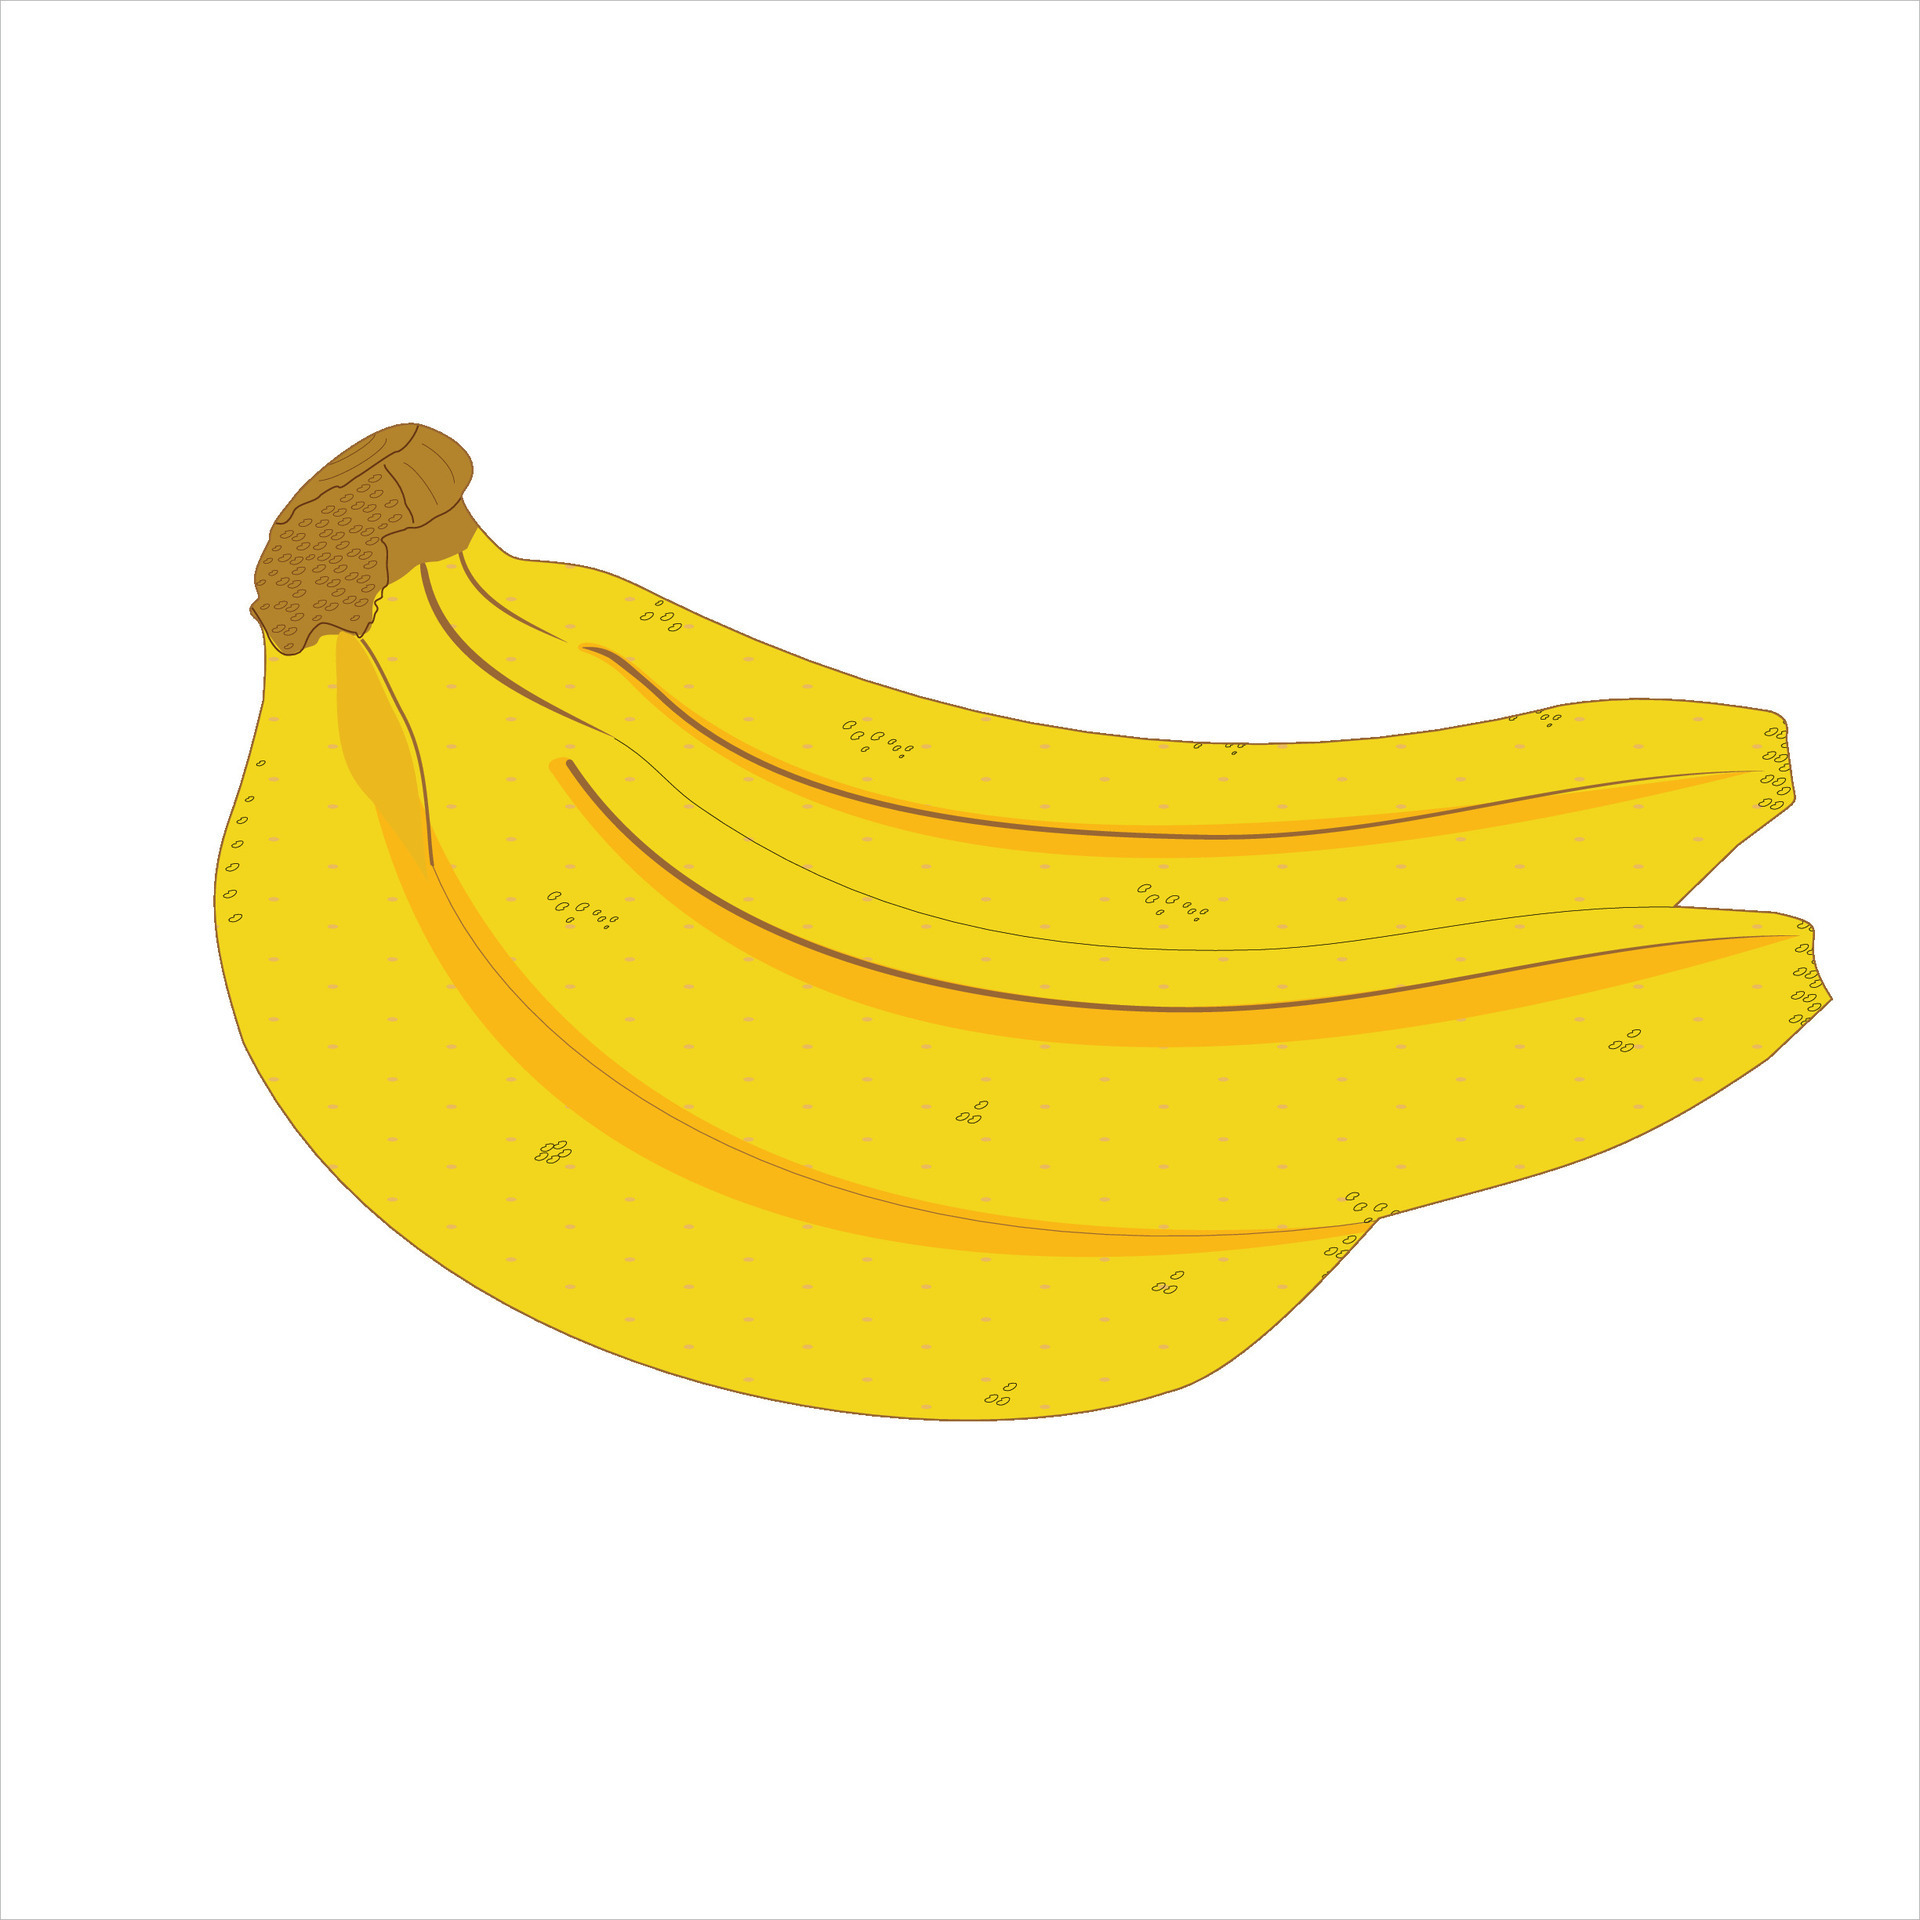 https://static.vecteezy.com/system/resources/previews/026/728/599/original/banana-fruit-food-isolated-yellow-healthy-tropical-ripe-white-fresh-bunch-sweet-diet-snack-eating-organic-peel-freshness-health-vegetarian-vitamin-object-bananas-nature-nobody-vector.jpg